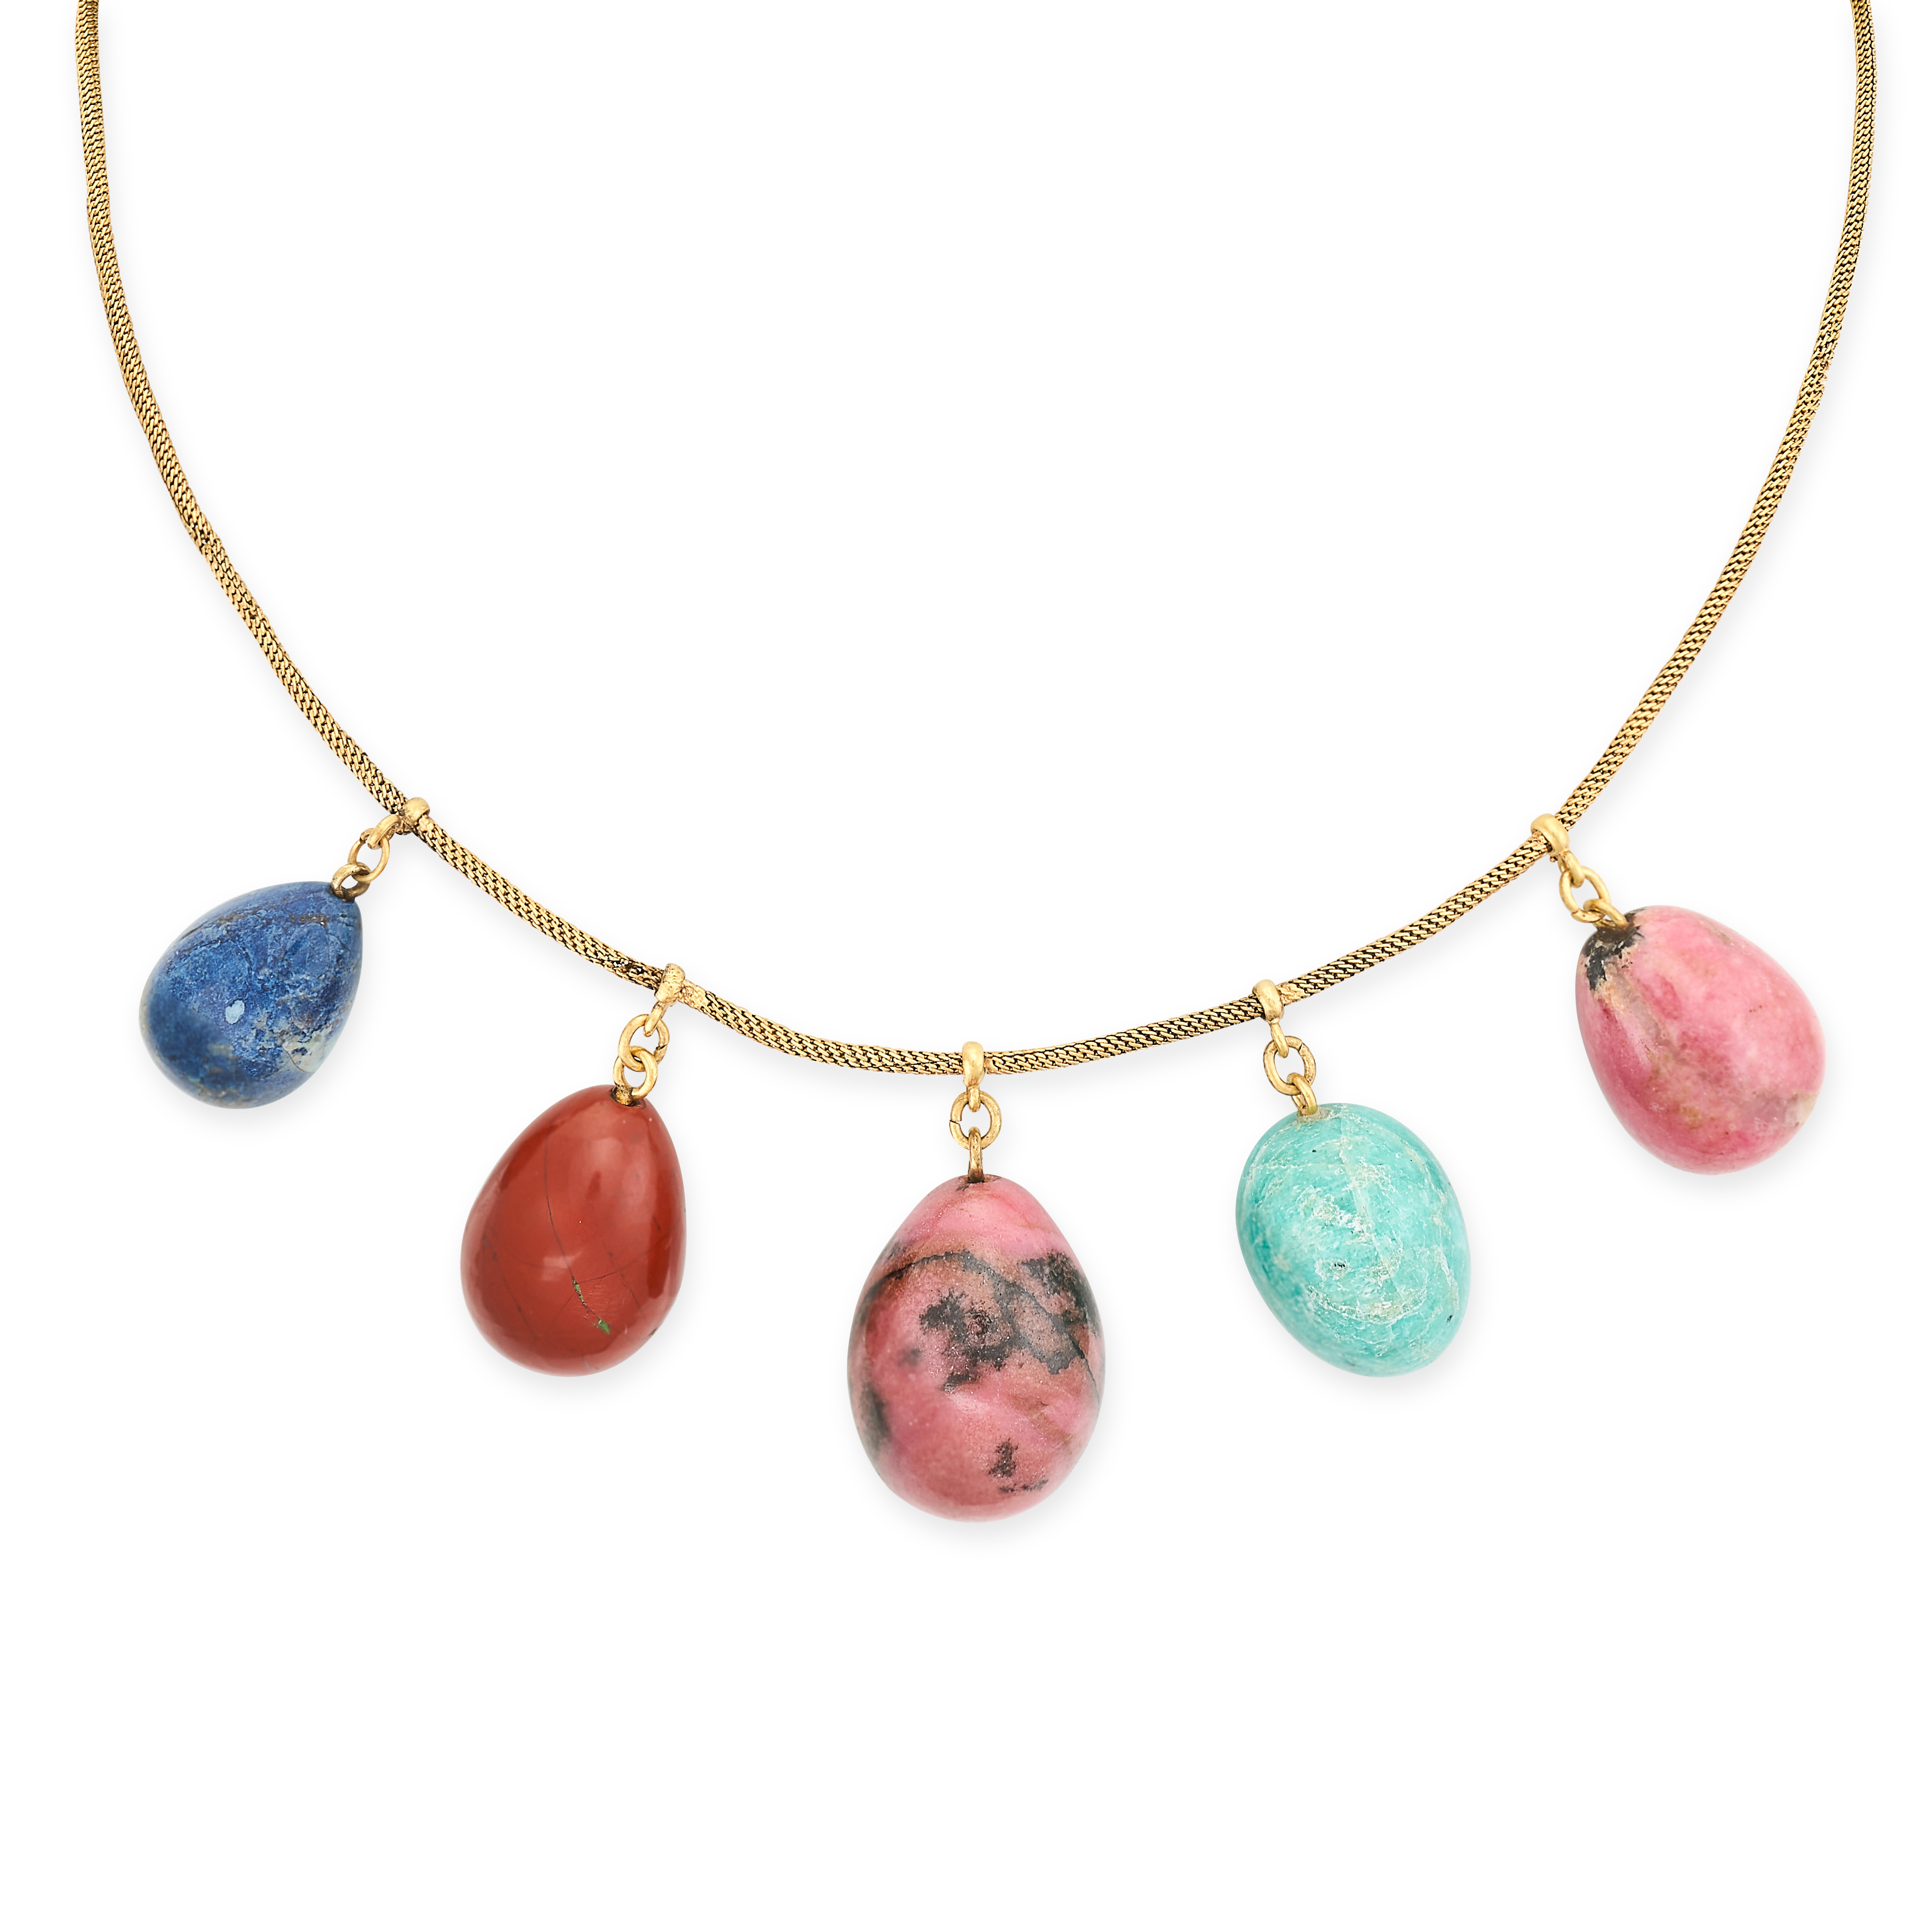 A HARDSTONE EGG NECKLACE in yellow gold, comprising a fine snake link chain, suspending polished